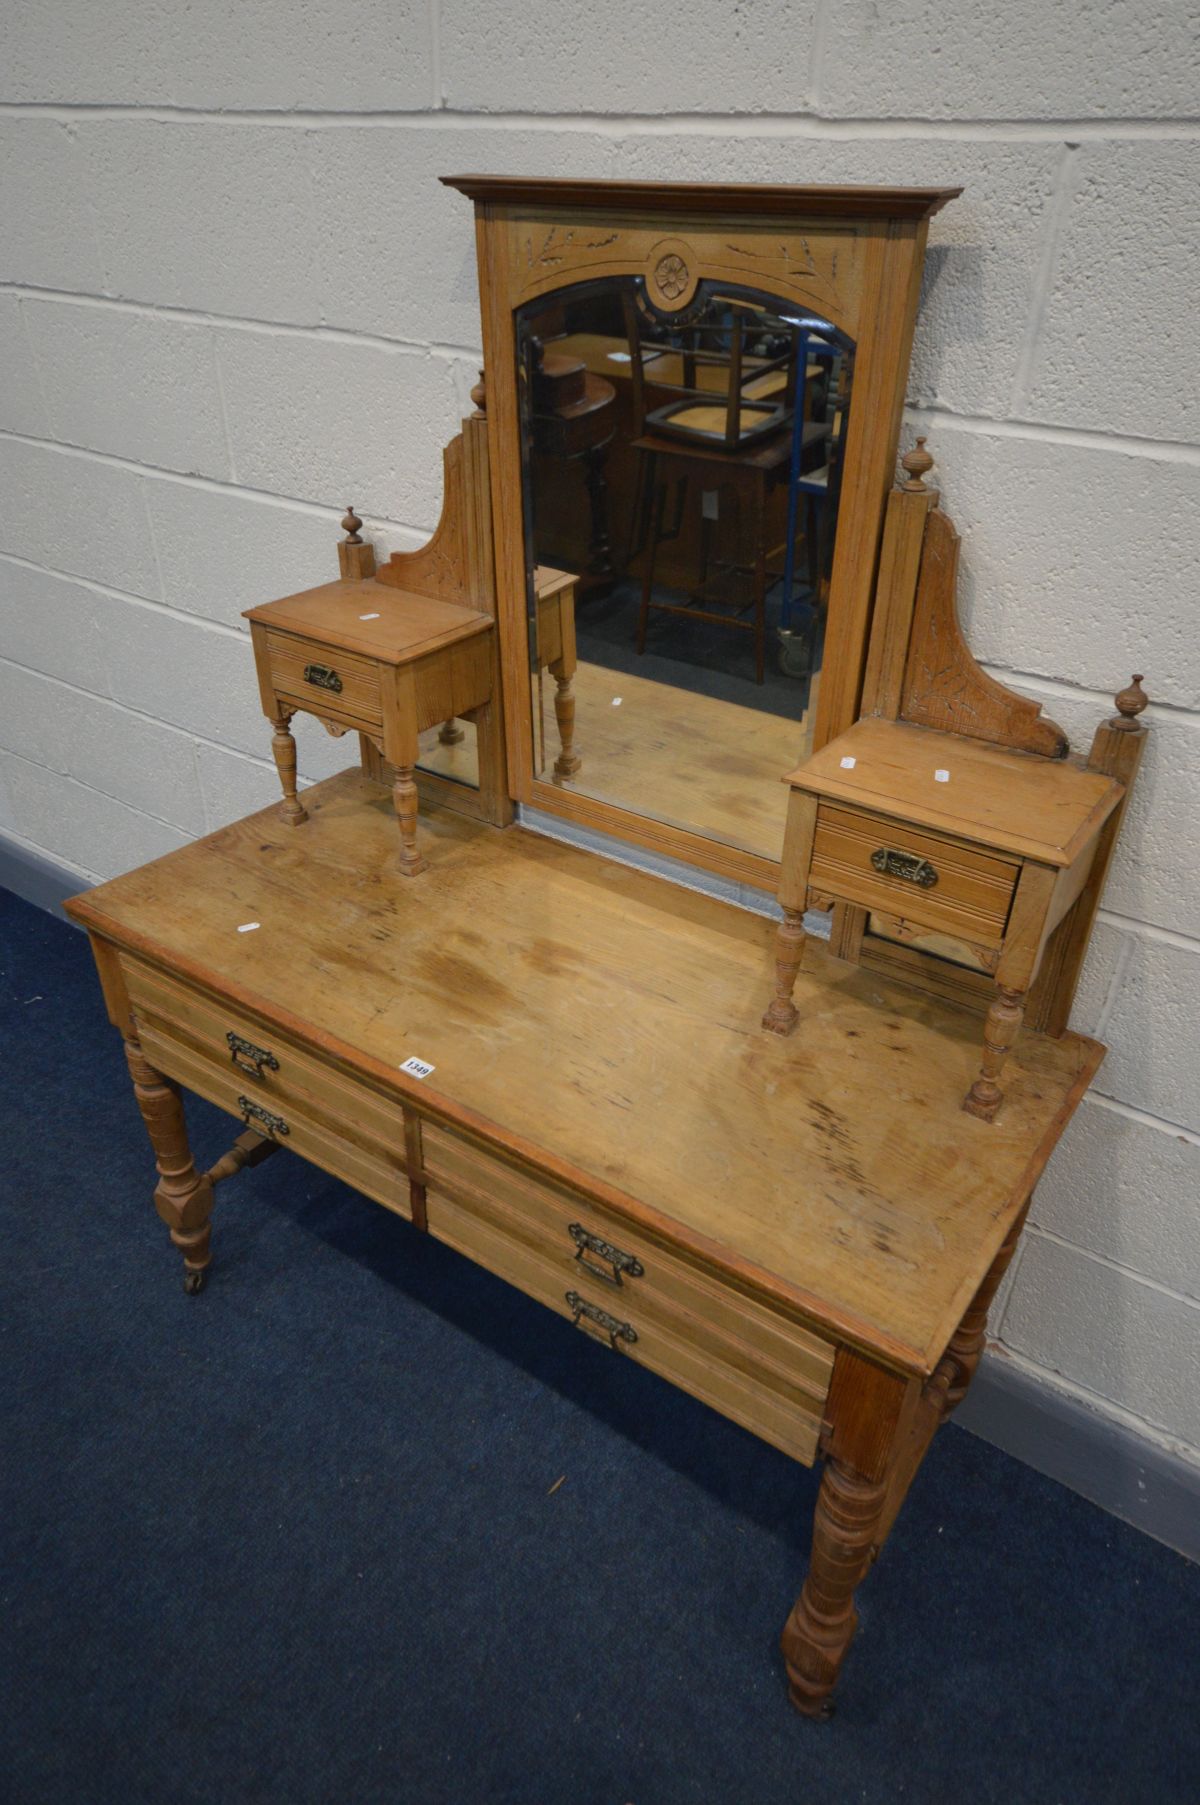 AN EDWARDIAN ASH DRESSING TABLE with a bevelled edge swing mirror flanked by two single drawers, - Image 2 of 2